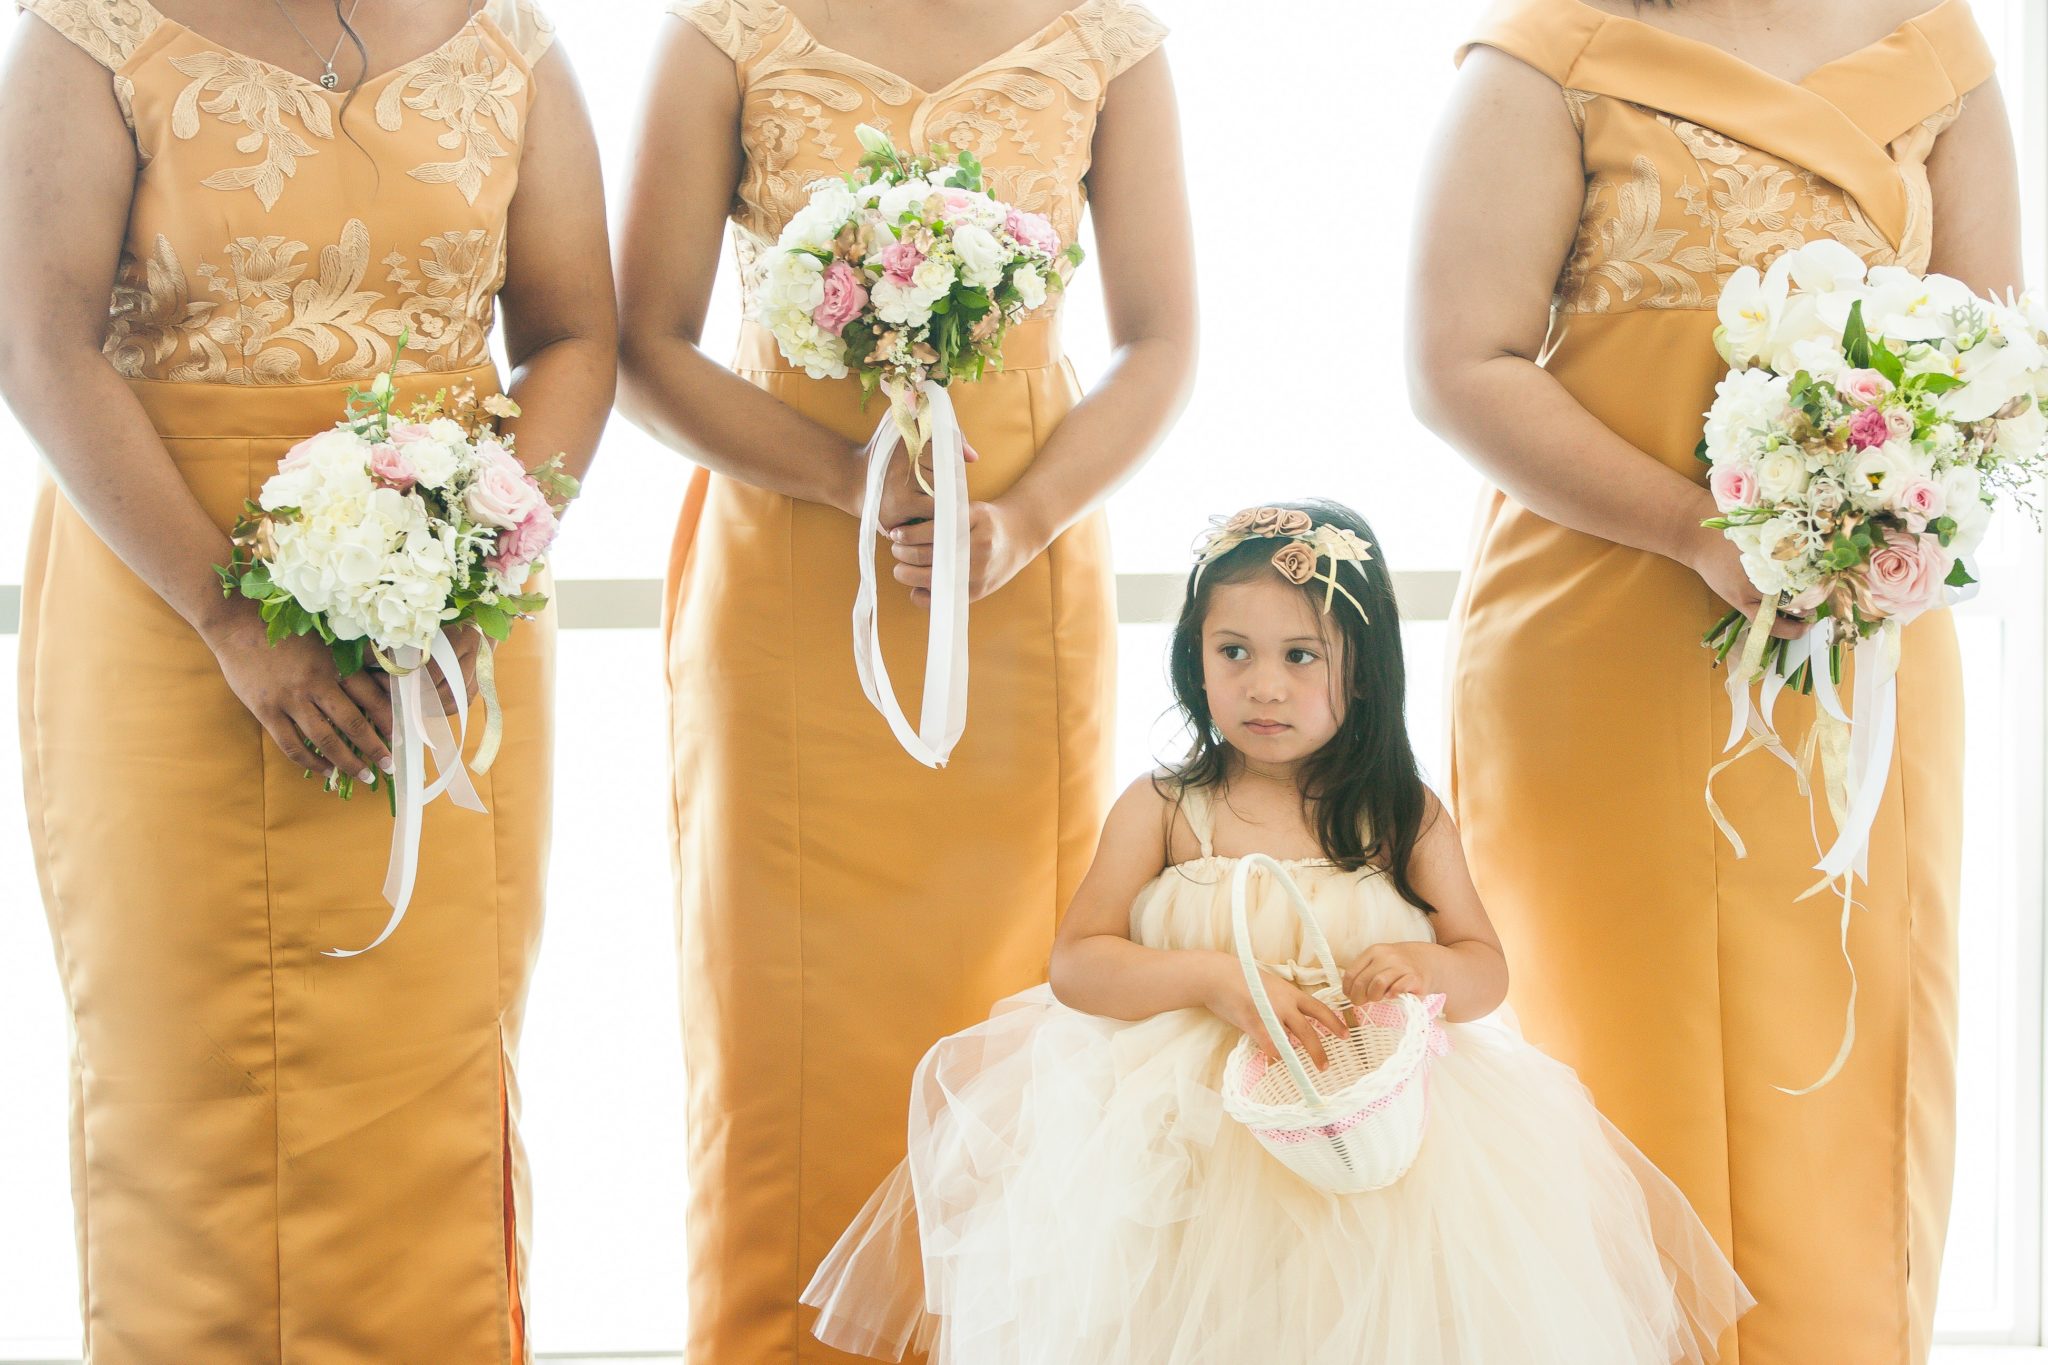 A young flower girl in a white dress stands in front of a line of bridesmaids in yellow dresses. The flower girl holds a basket of petals. 